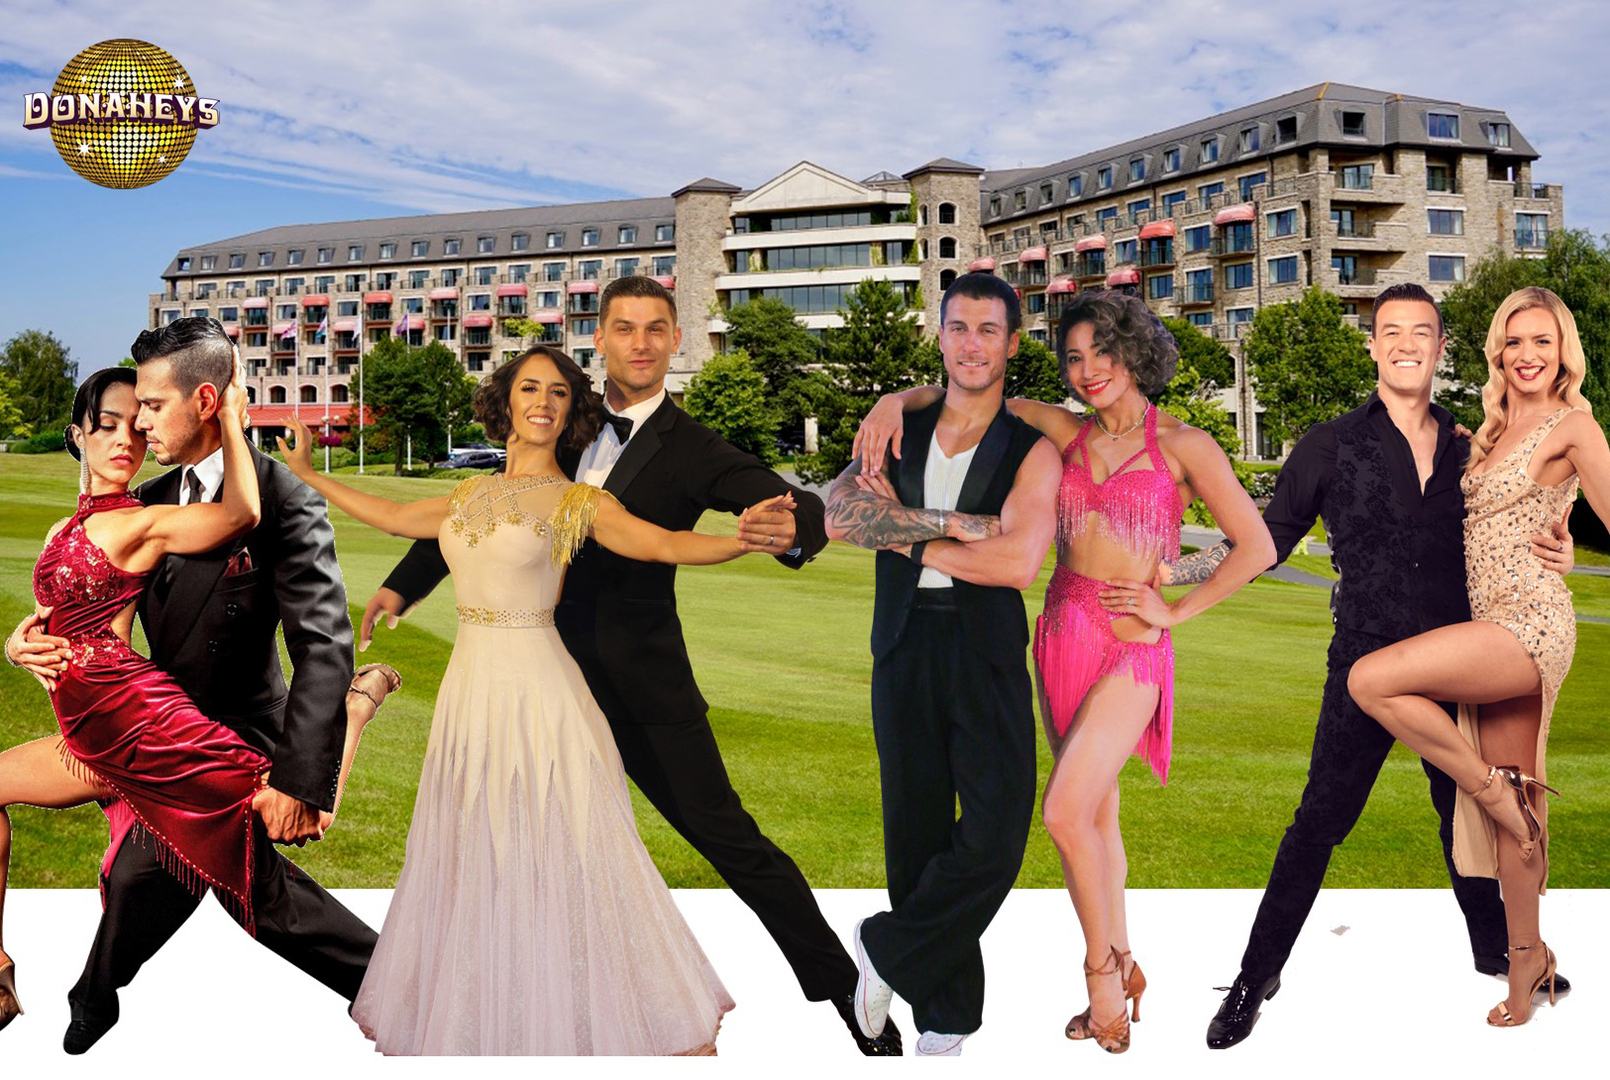 Donaheys Dancing With The Stars Weekend, Newport, Wales, United Kingdom